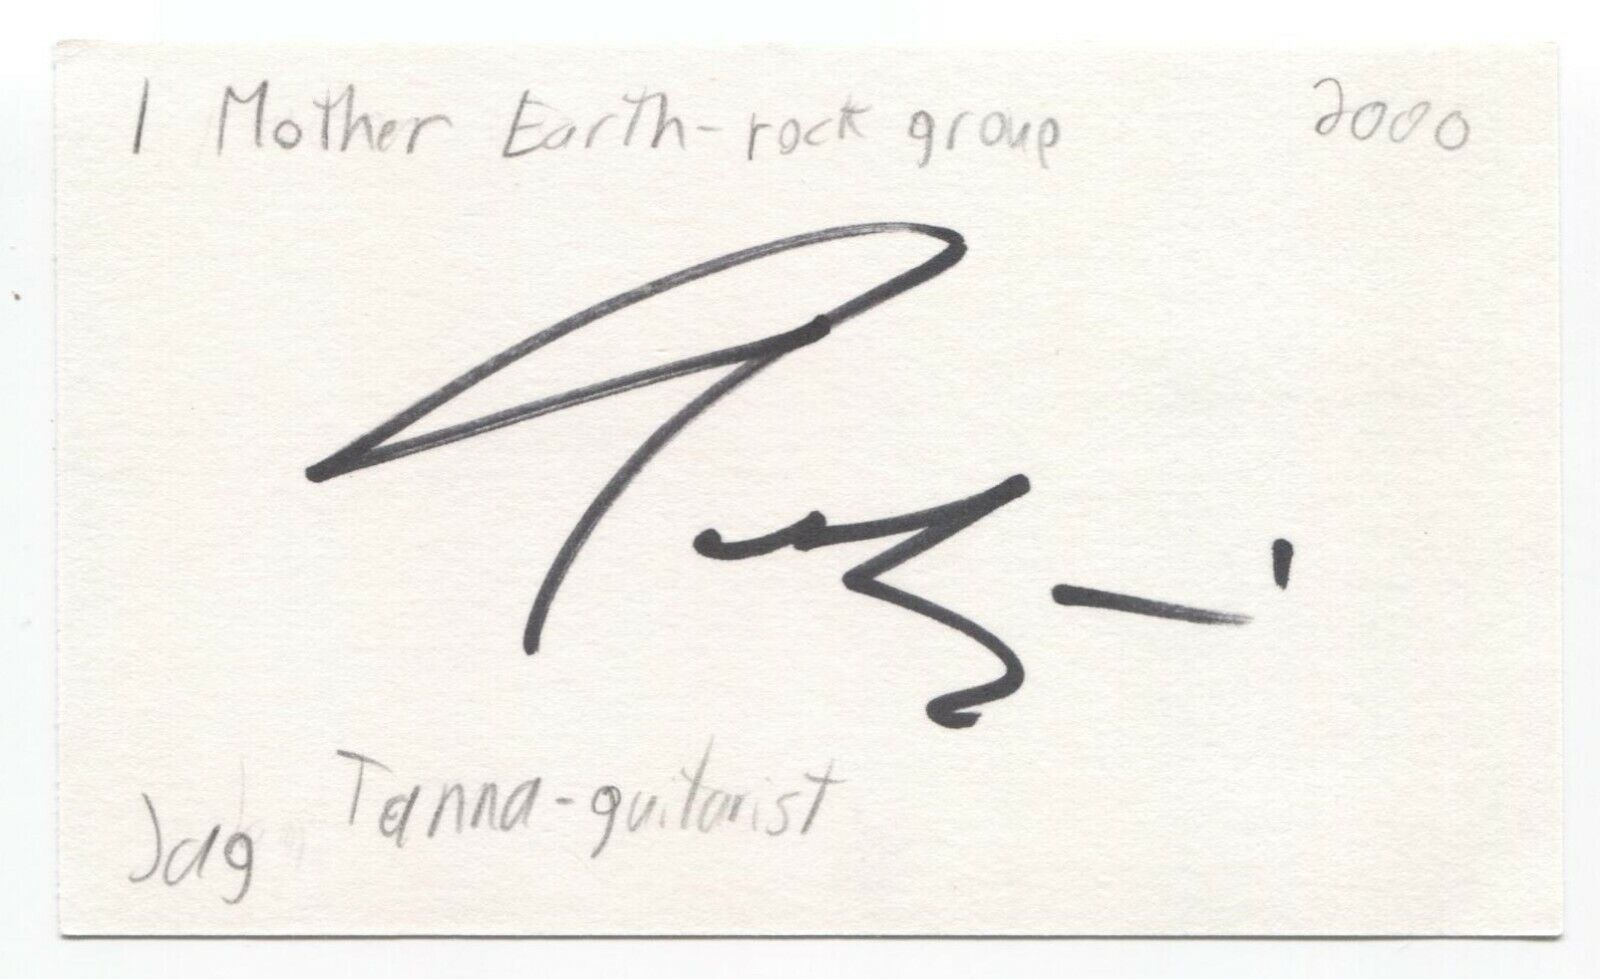 I Mother Earth - Jagori Tanna Card Autographed 3x5 Opening Very popular! large release sale Index Signed